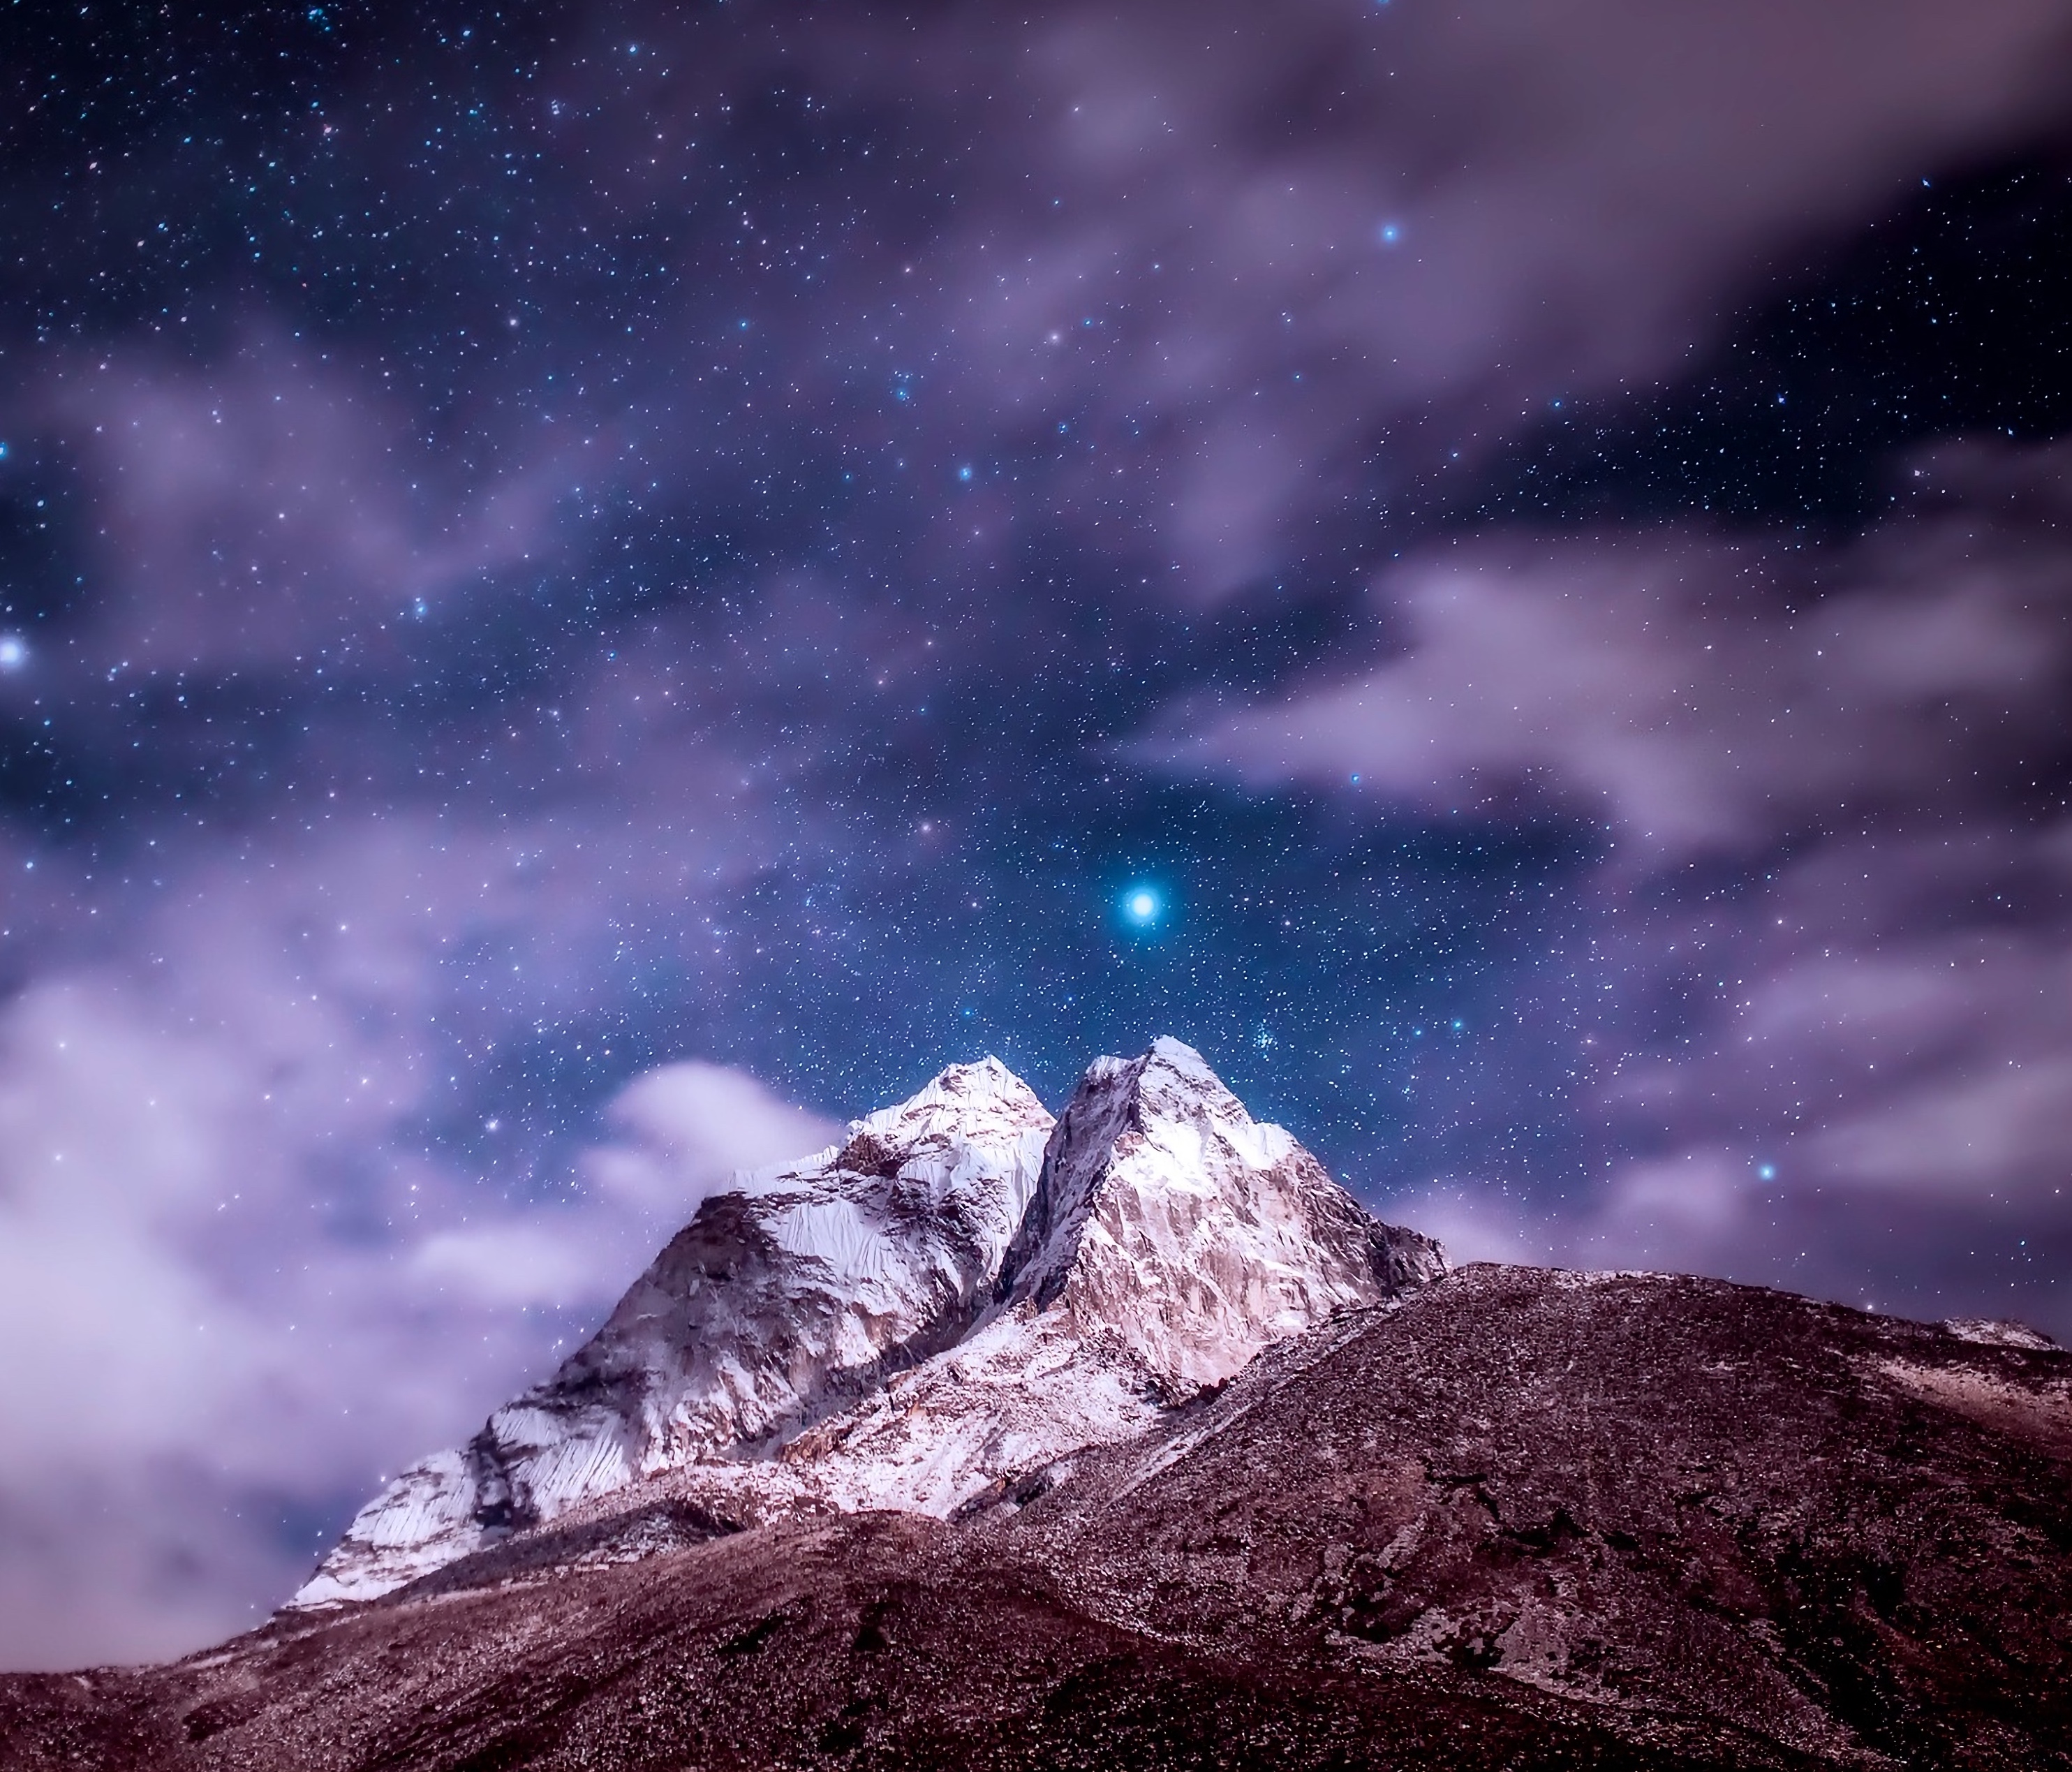 himalayas, starry sky, mountains, nature, clouds, vertex, top, snow covered, snowbound High Definition image